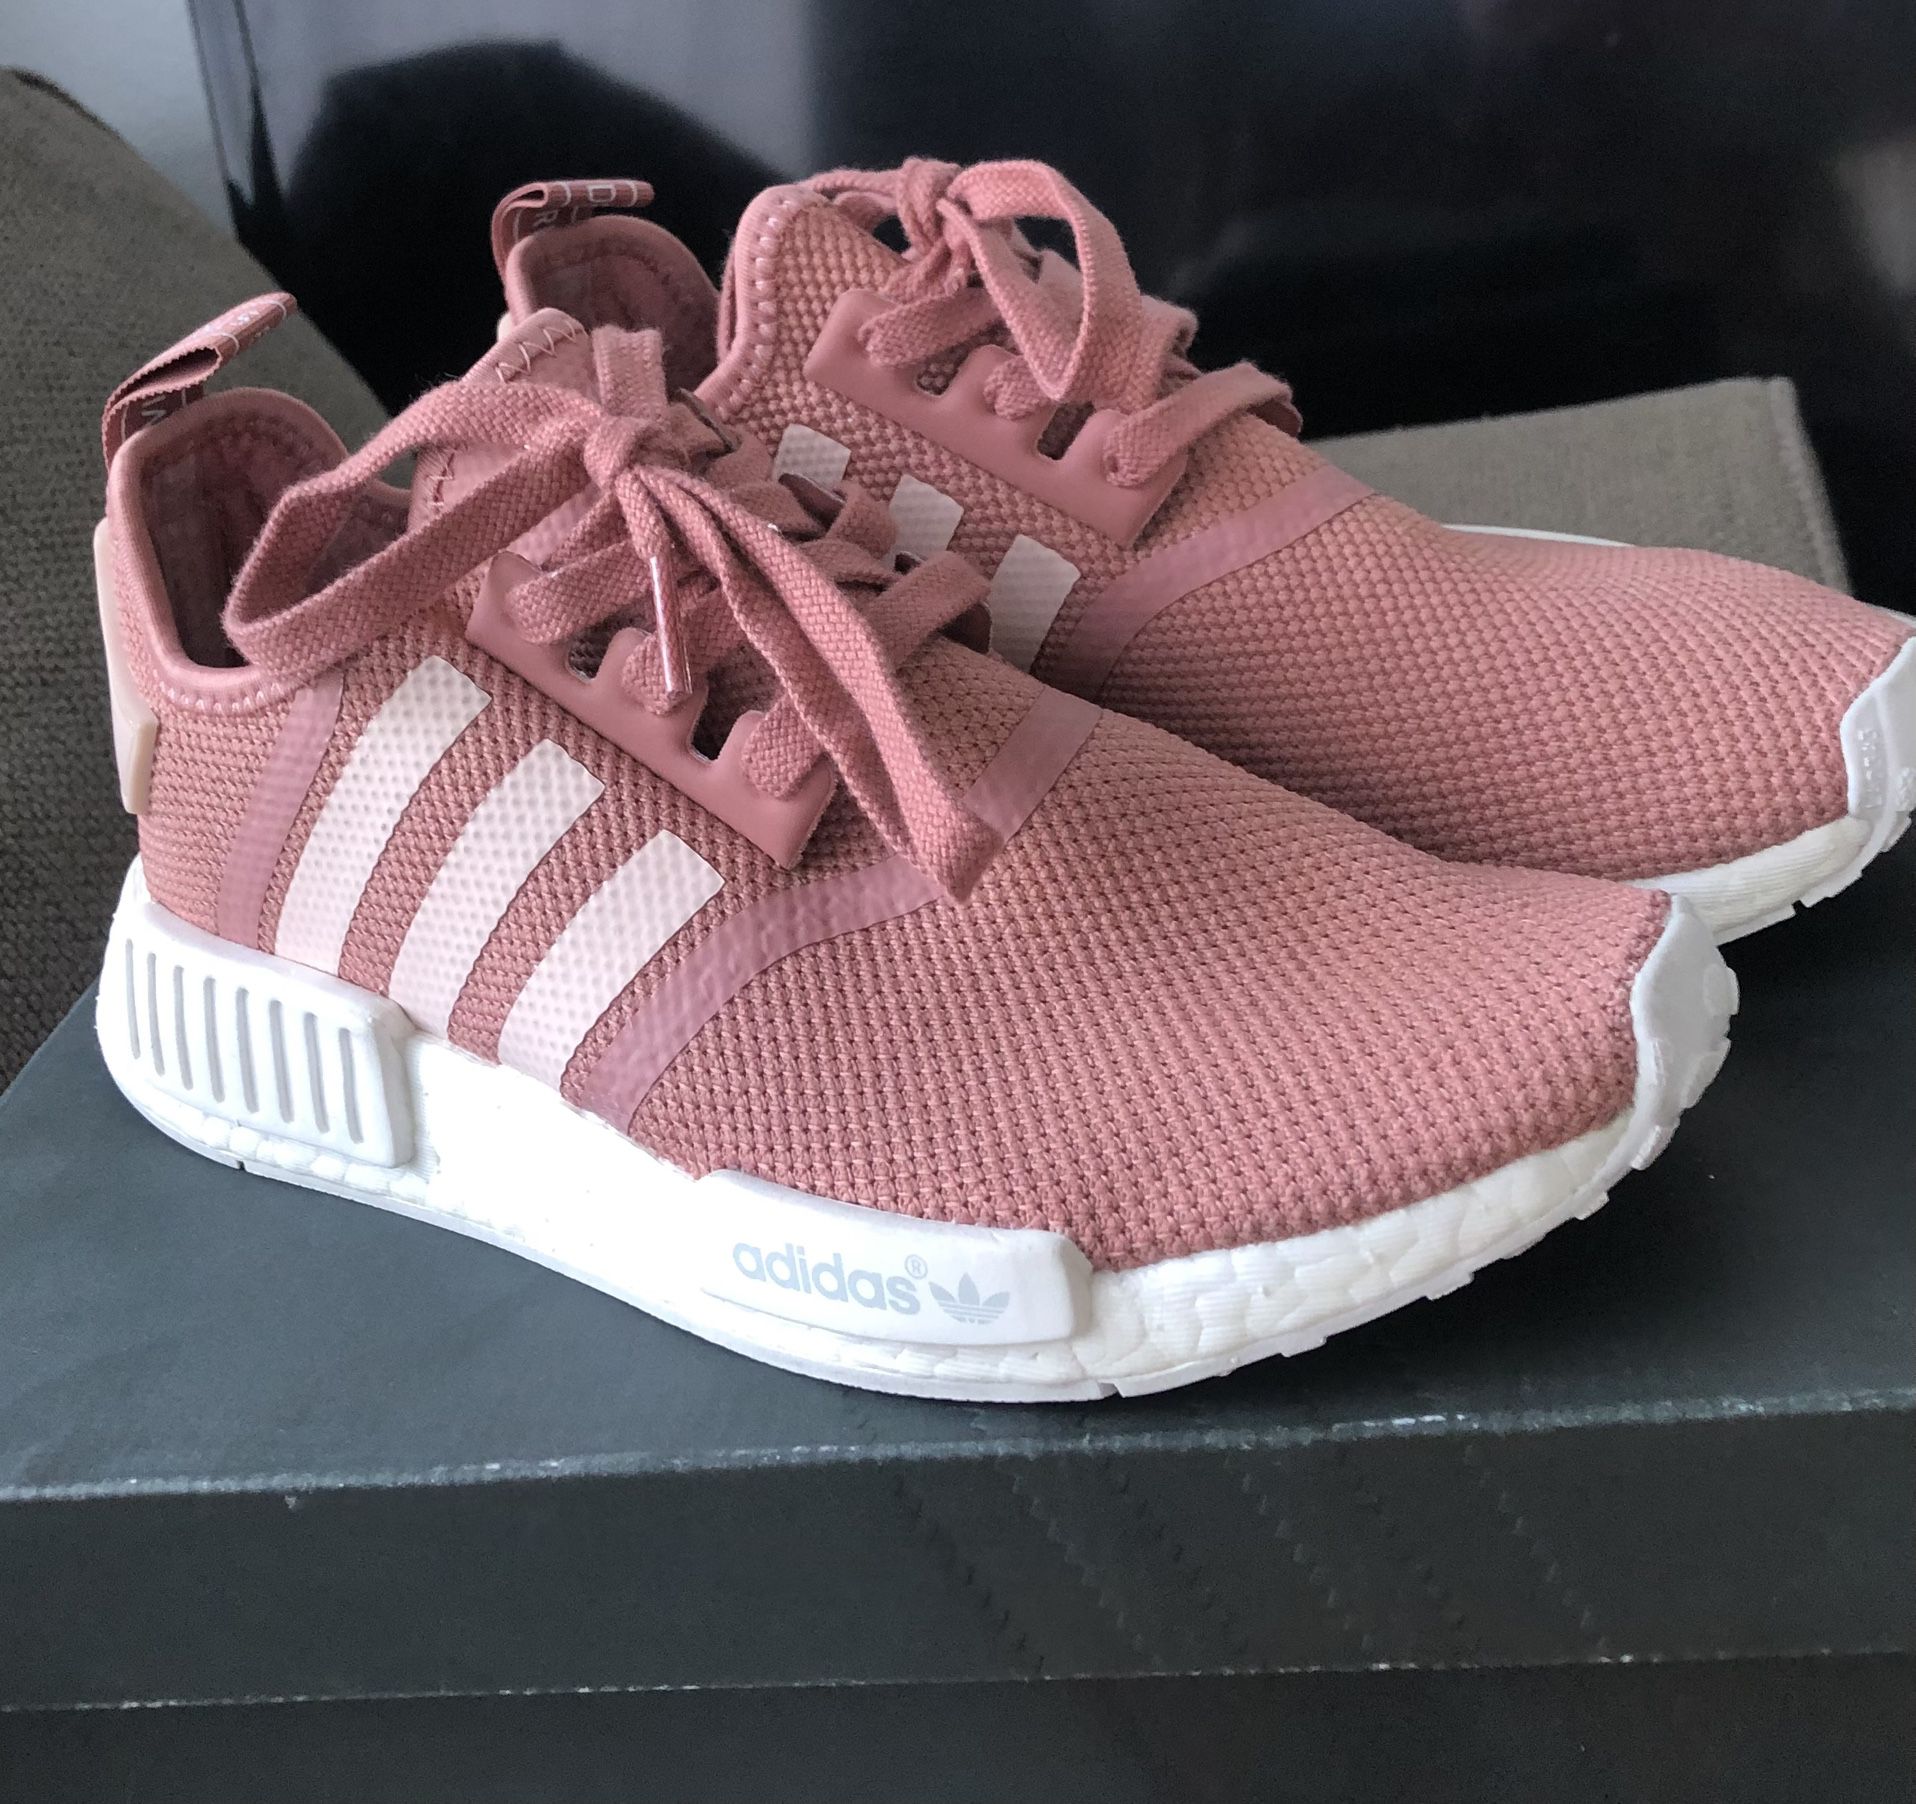 Skylight søsyge Anmelder Nmd Raw Pink -Rare for Sale in Las Vegas, NV - OfferUp